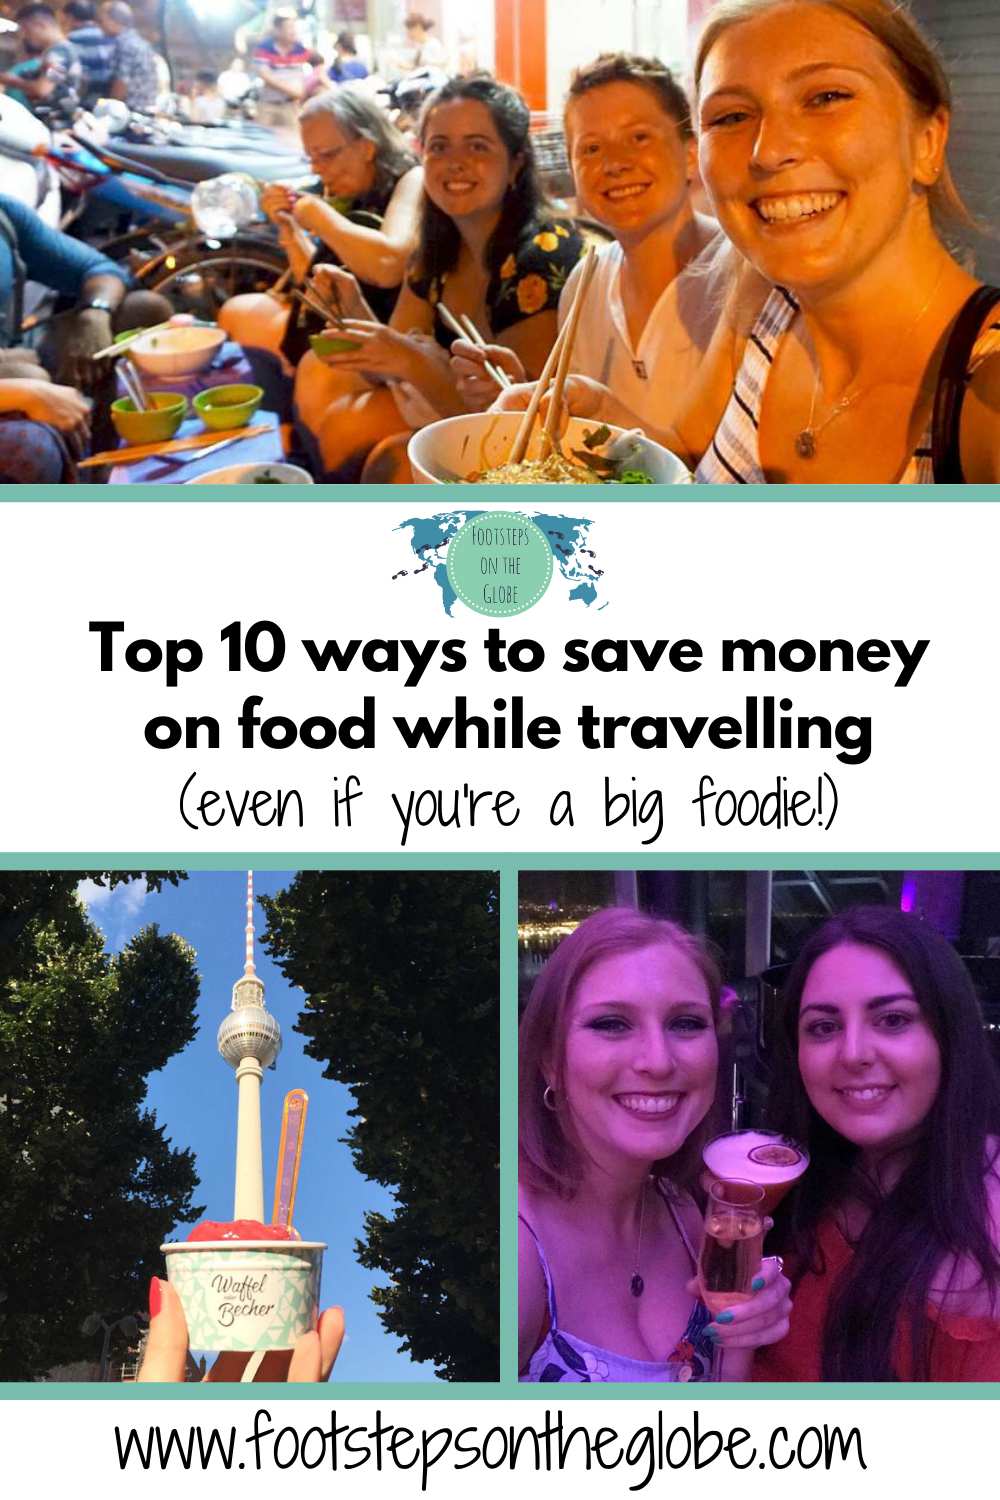 Pinterest image of Mel having street food in Vietnam with friends, having cocktails with a friend in Barcelona and holding an icecream in a cup up to the Berlin TV Tower with the text: "Top 10 ways to save money on food while travelling (even if you're a big foodie!)"